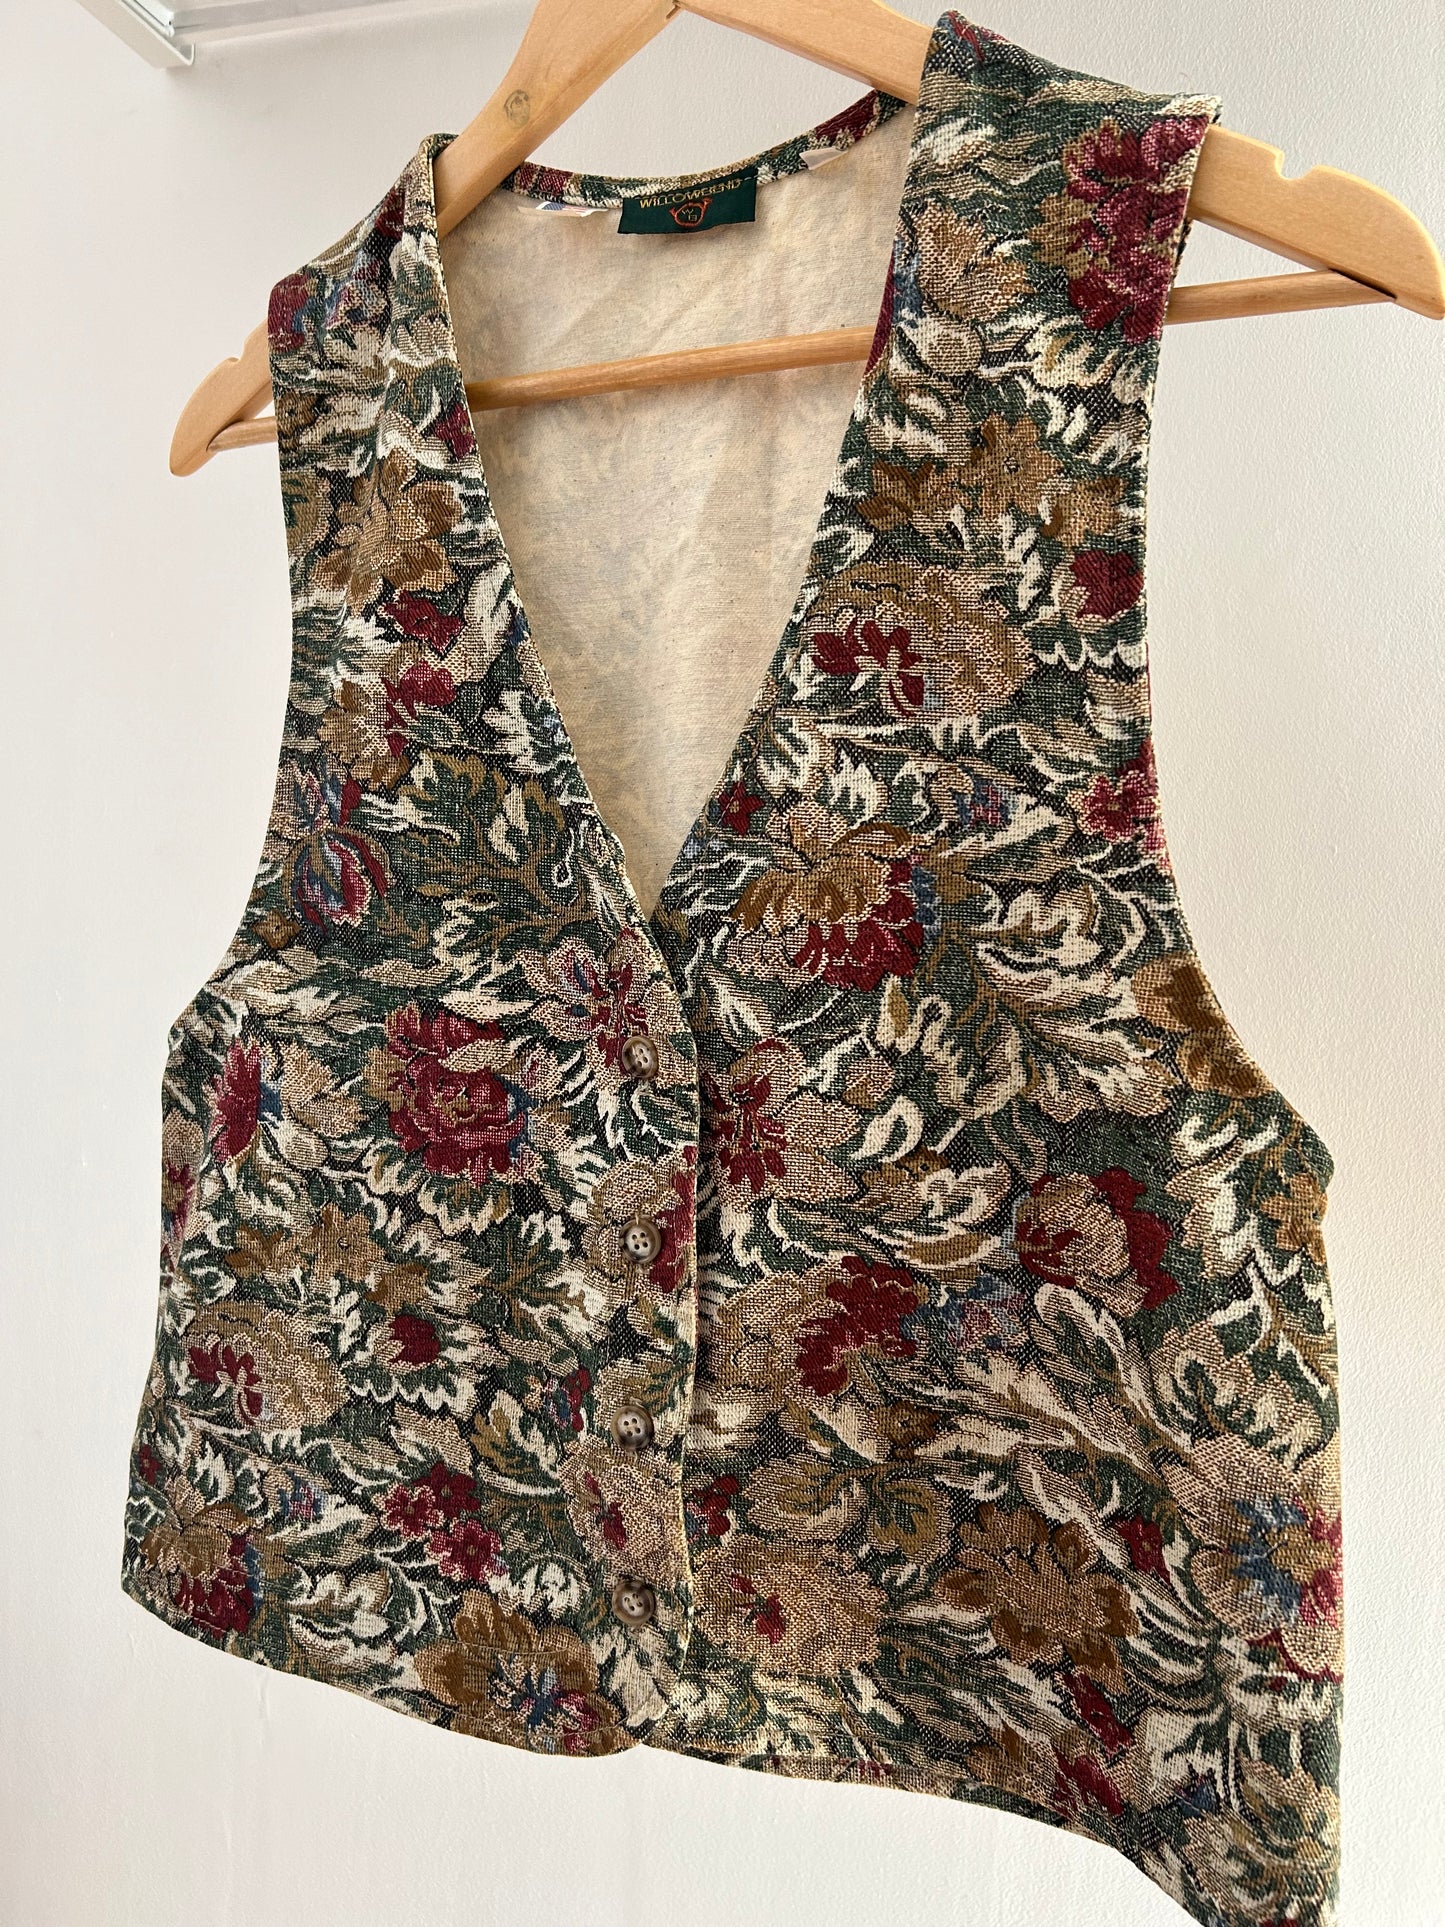 Vintage 1980s 1990s WILLOWBEND UK Size 10 (USA SMALL) Dark Green Dark Red & Cream Floral Tapestry 100% Cotton Waistcoat